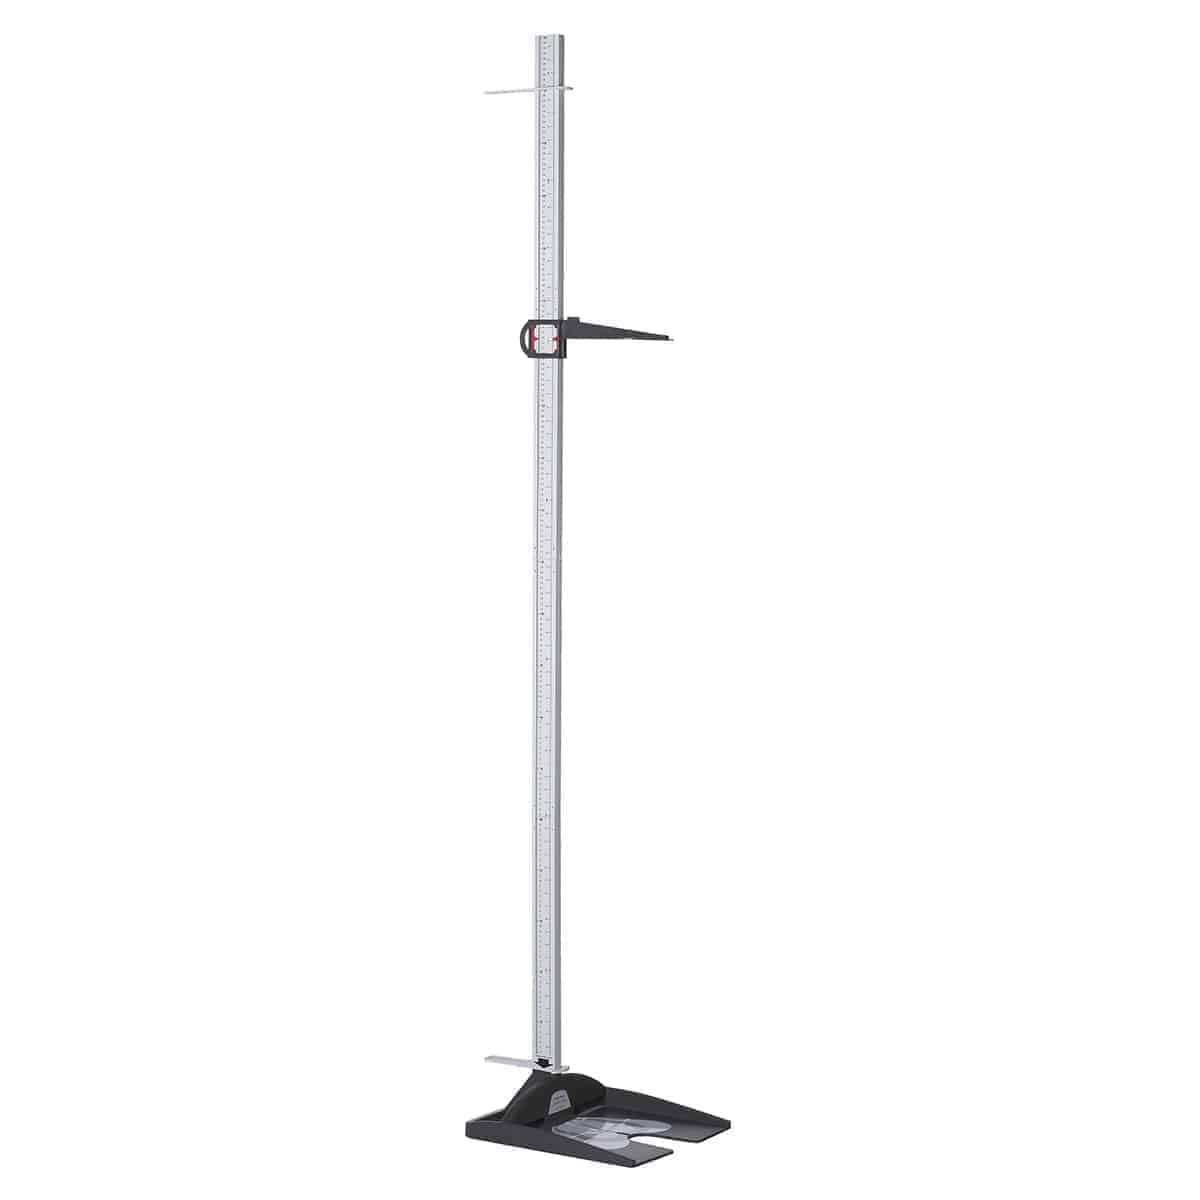 CHARDER HM200P Portable Height Rod